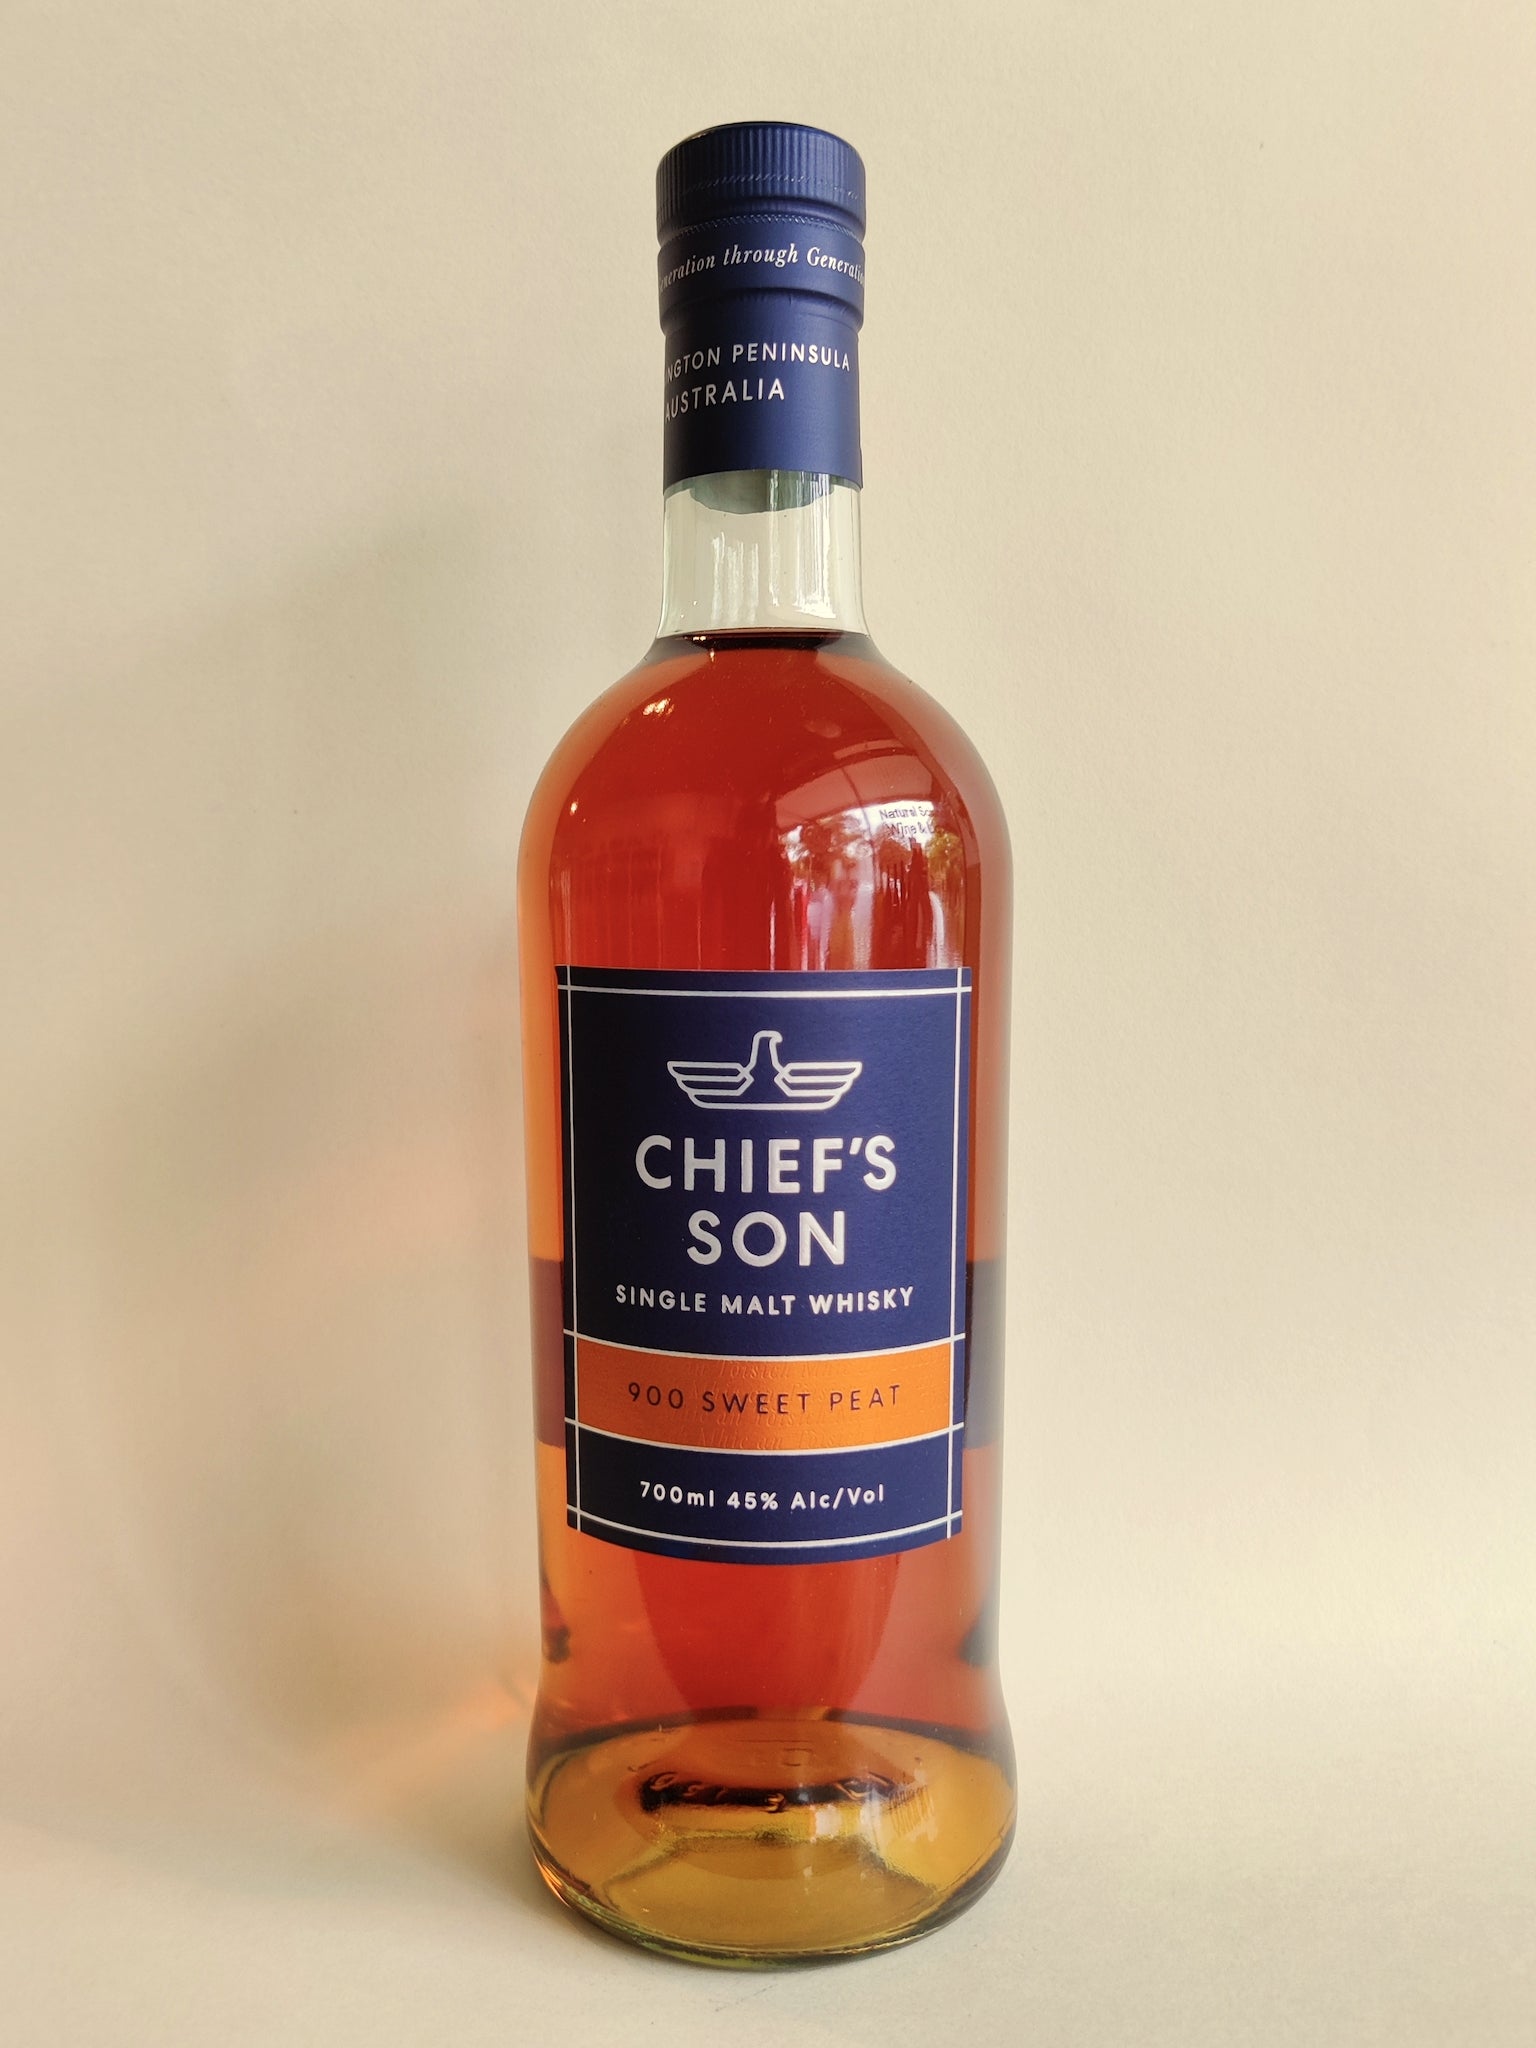 A bottle of Chief's Son 900 Sweet Peat Single Malt Whisky from the Mornington Peninsula, Victoria.